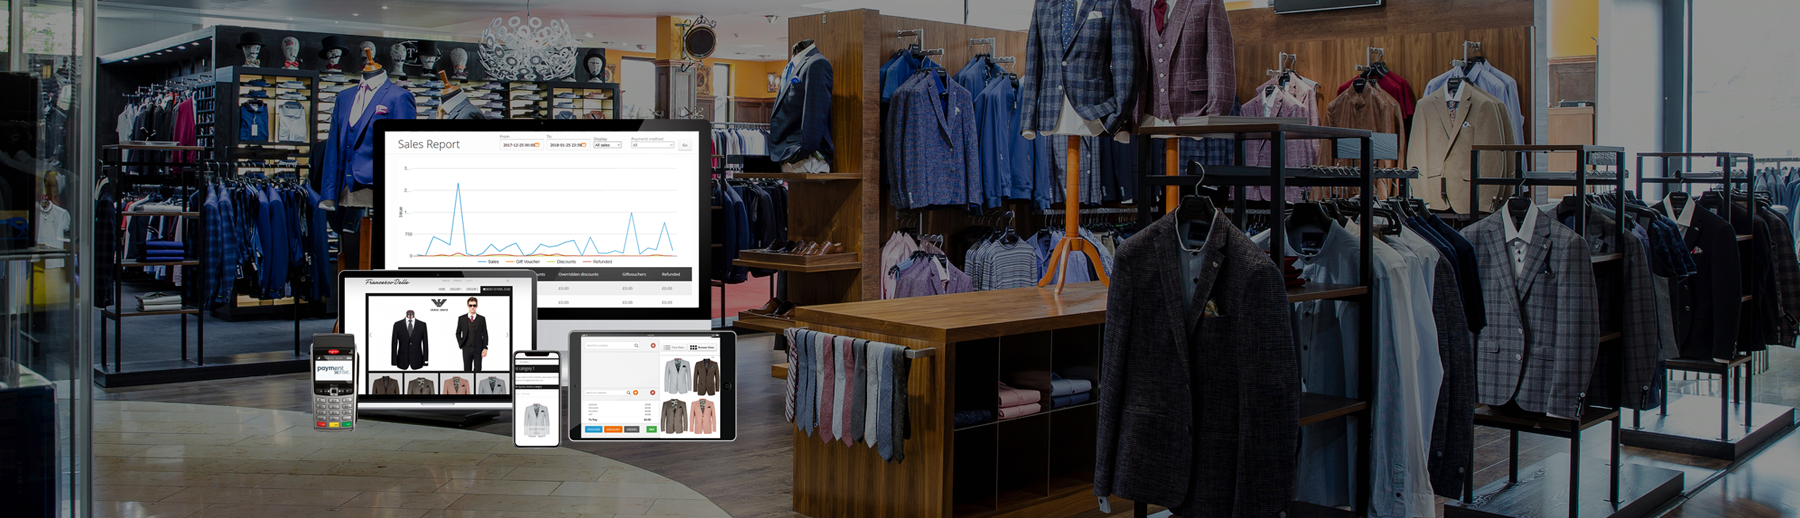 How does multichannel retailing benefit both merchants and customers?